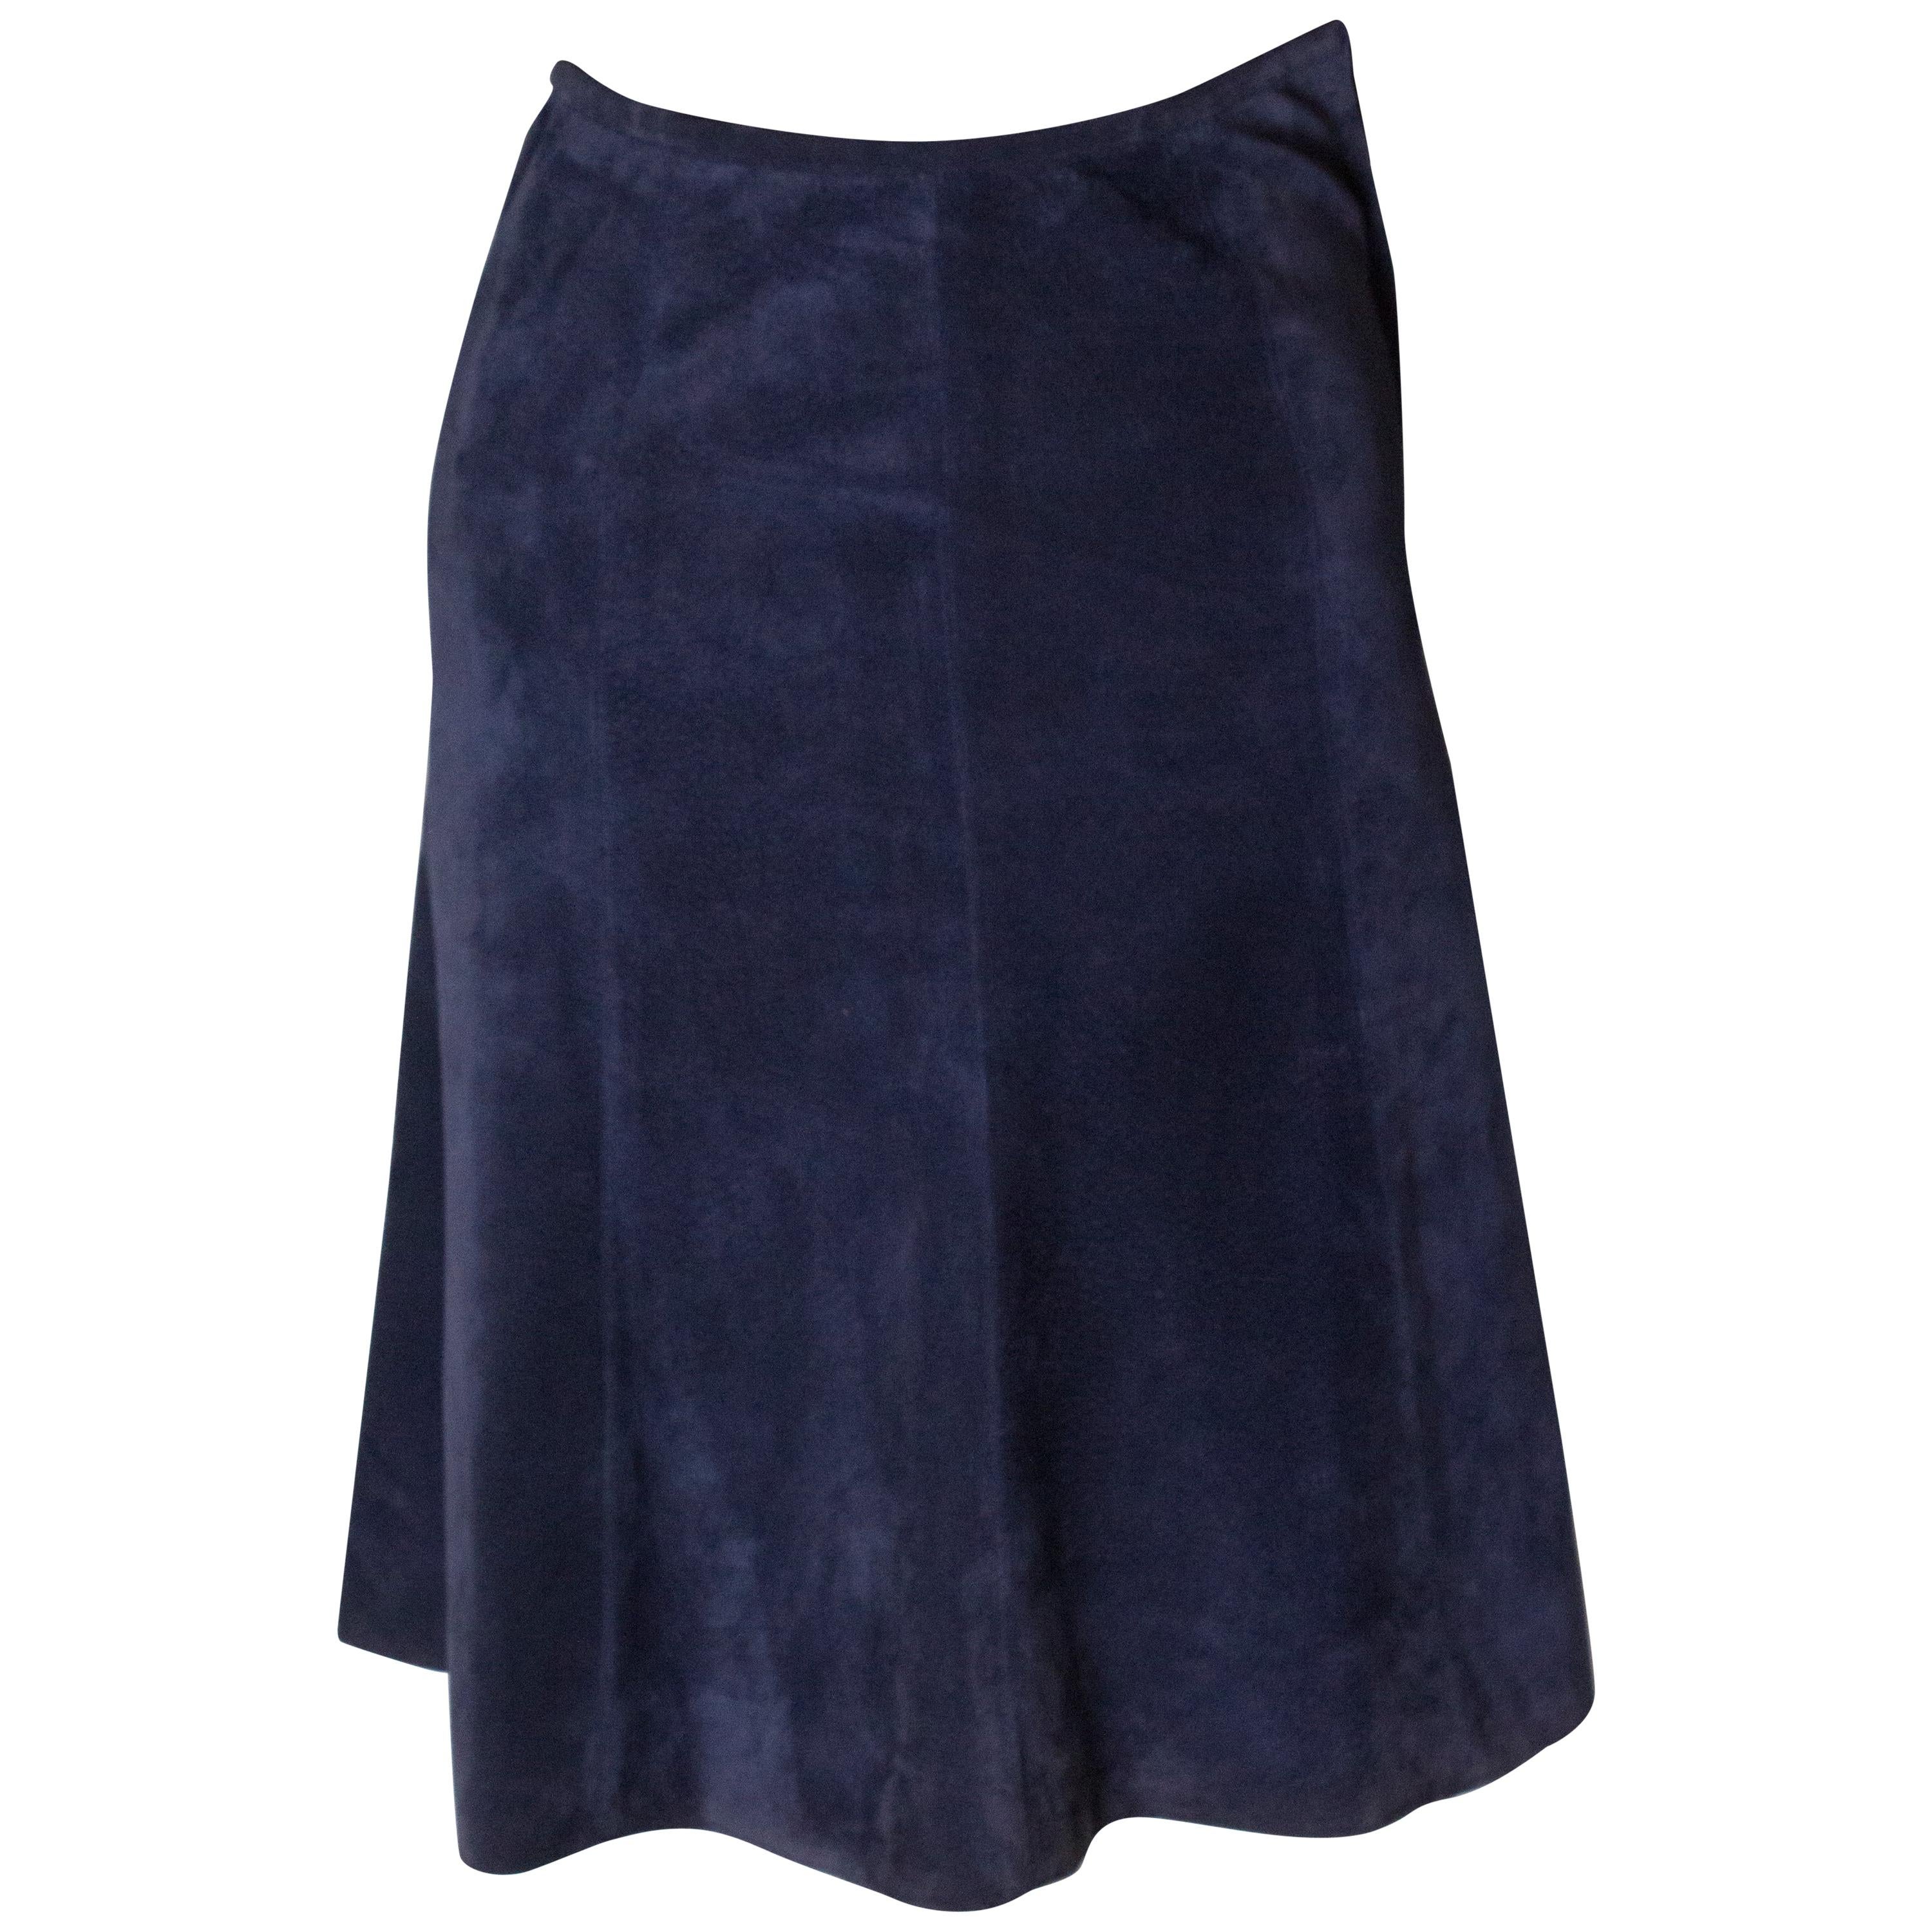 Vintage Blue Suede Skirt from Fortnum and Mason